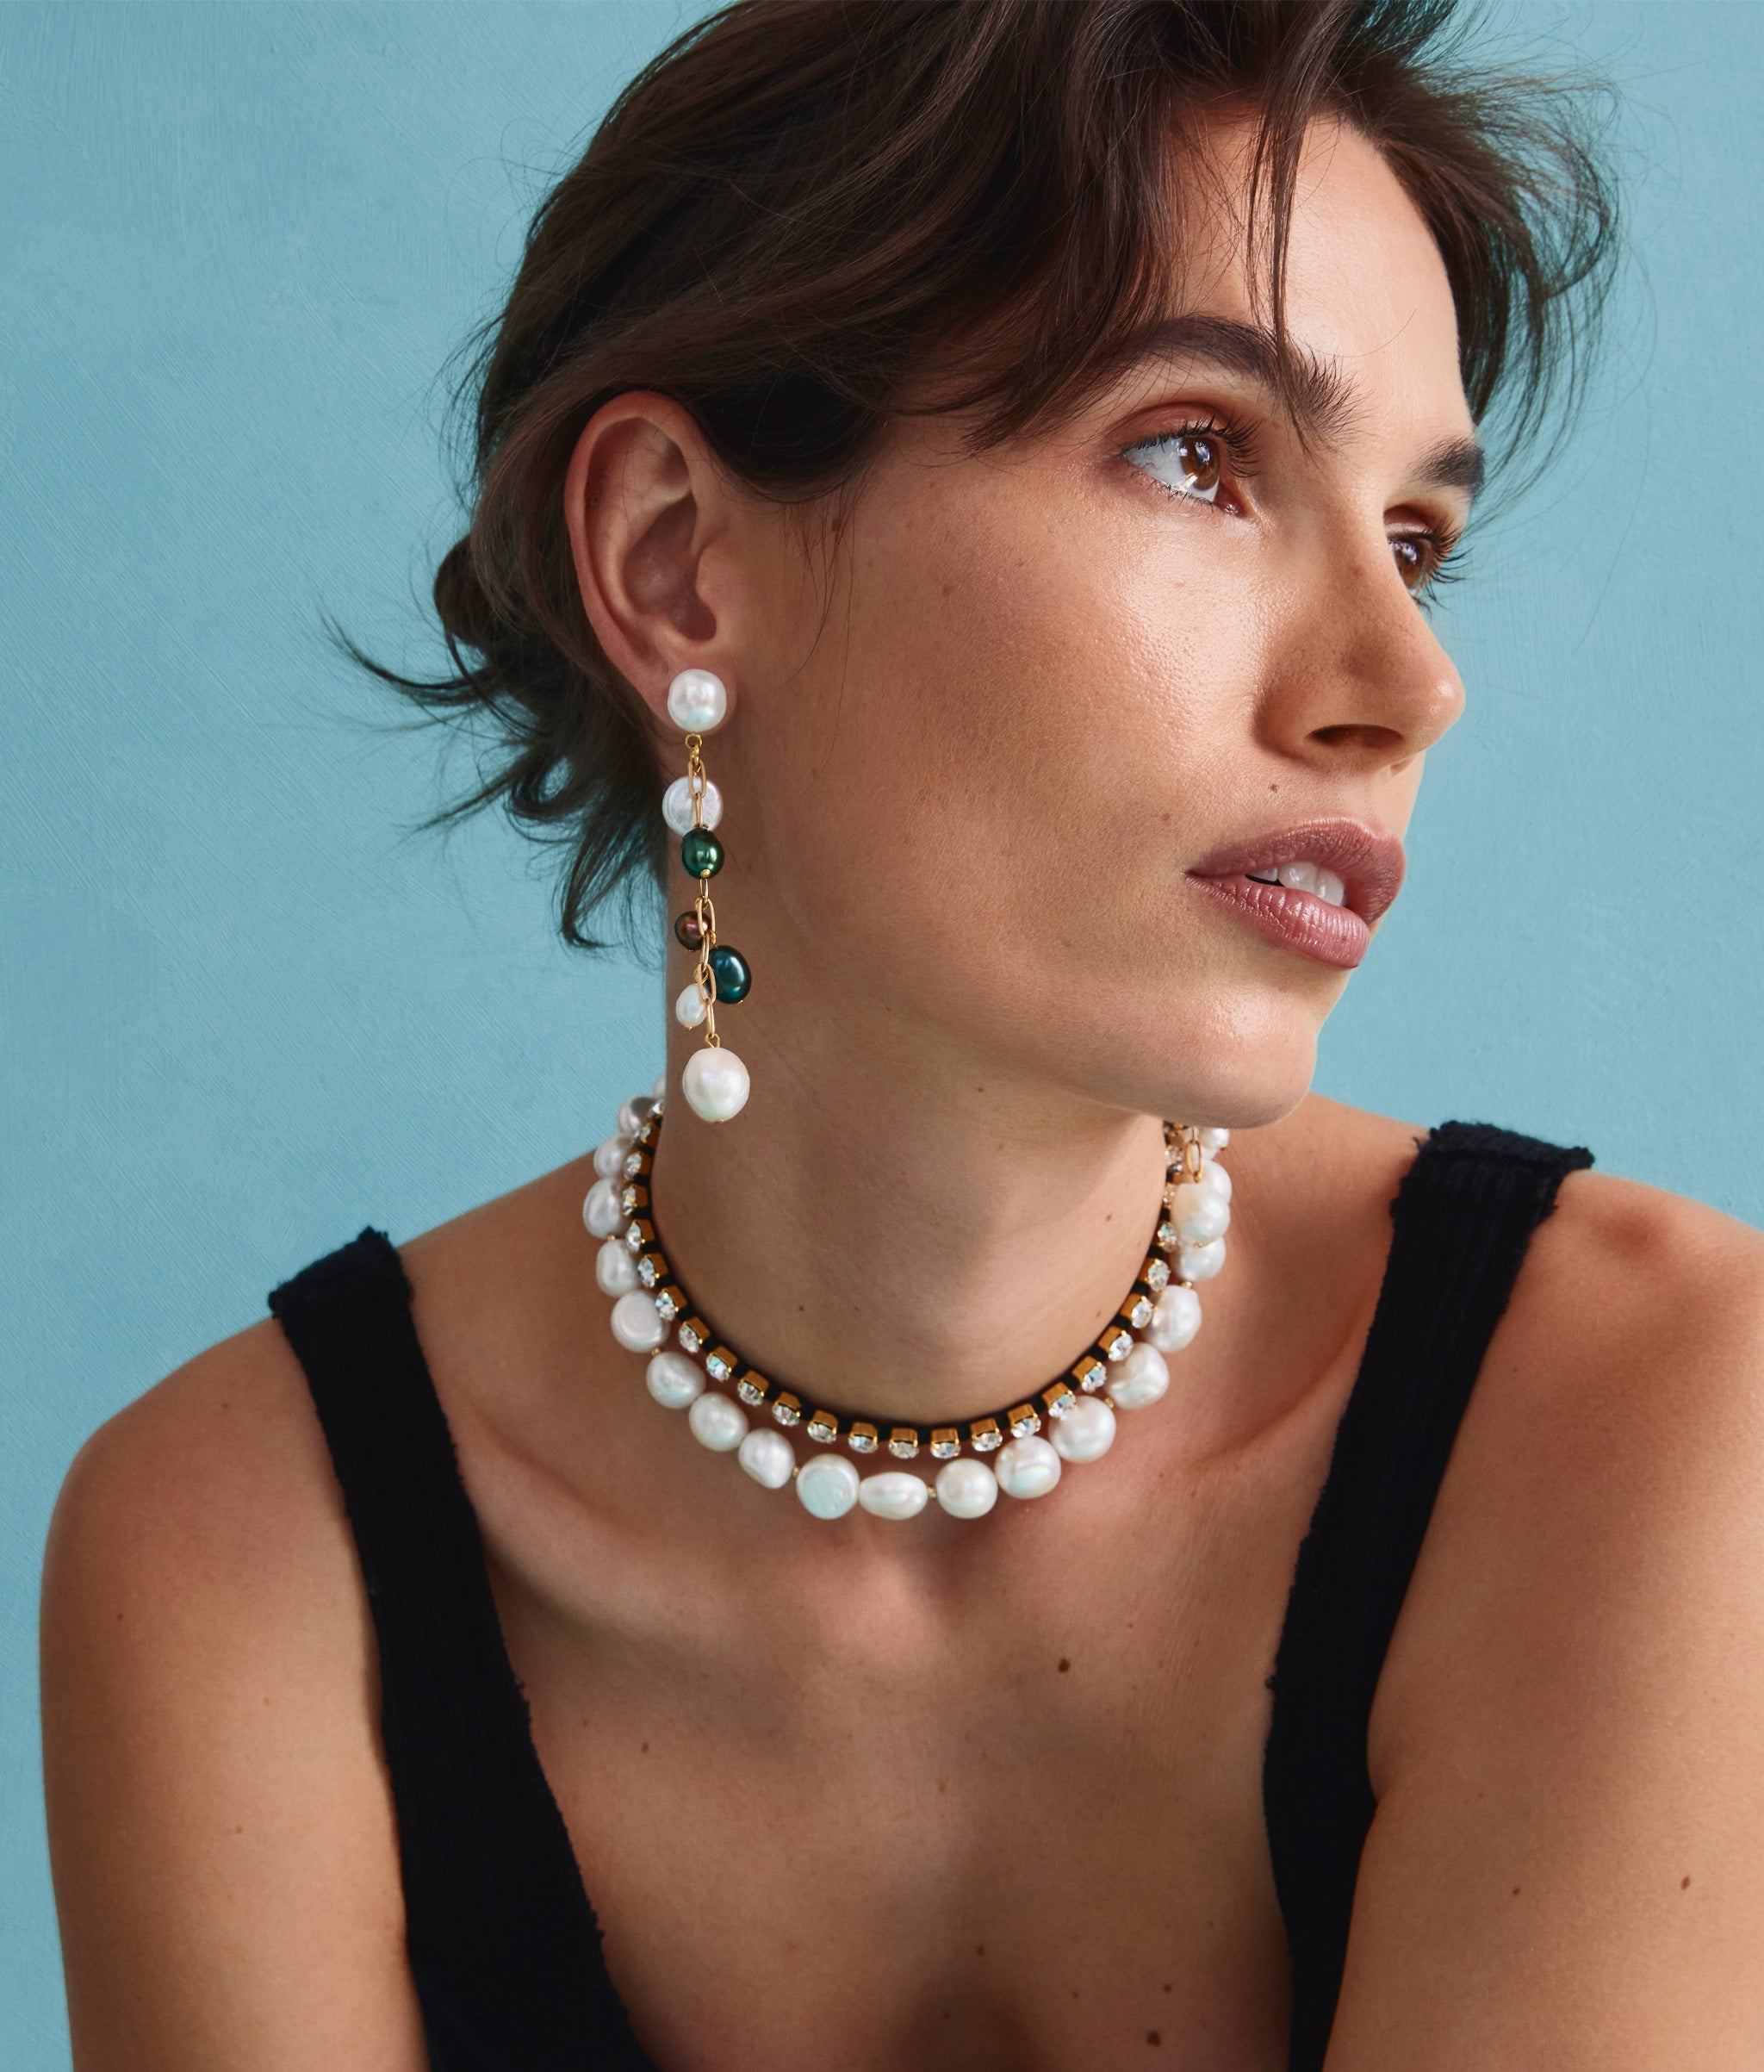 Model on blue backdrop wears black top with Crystal Lagoon II Necklace and Lightning Field Earrings.